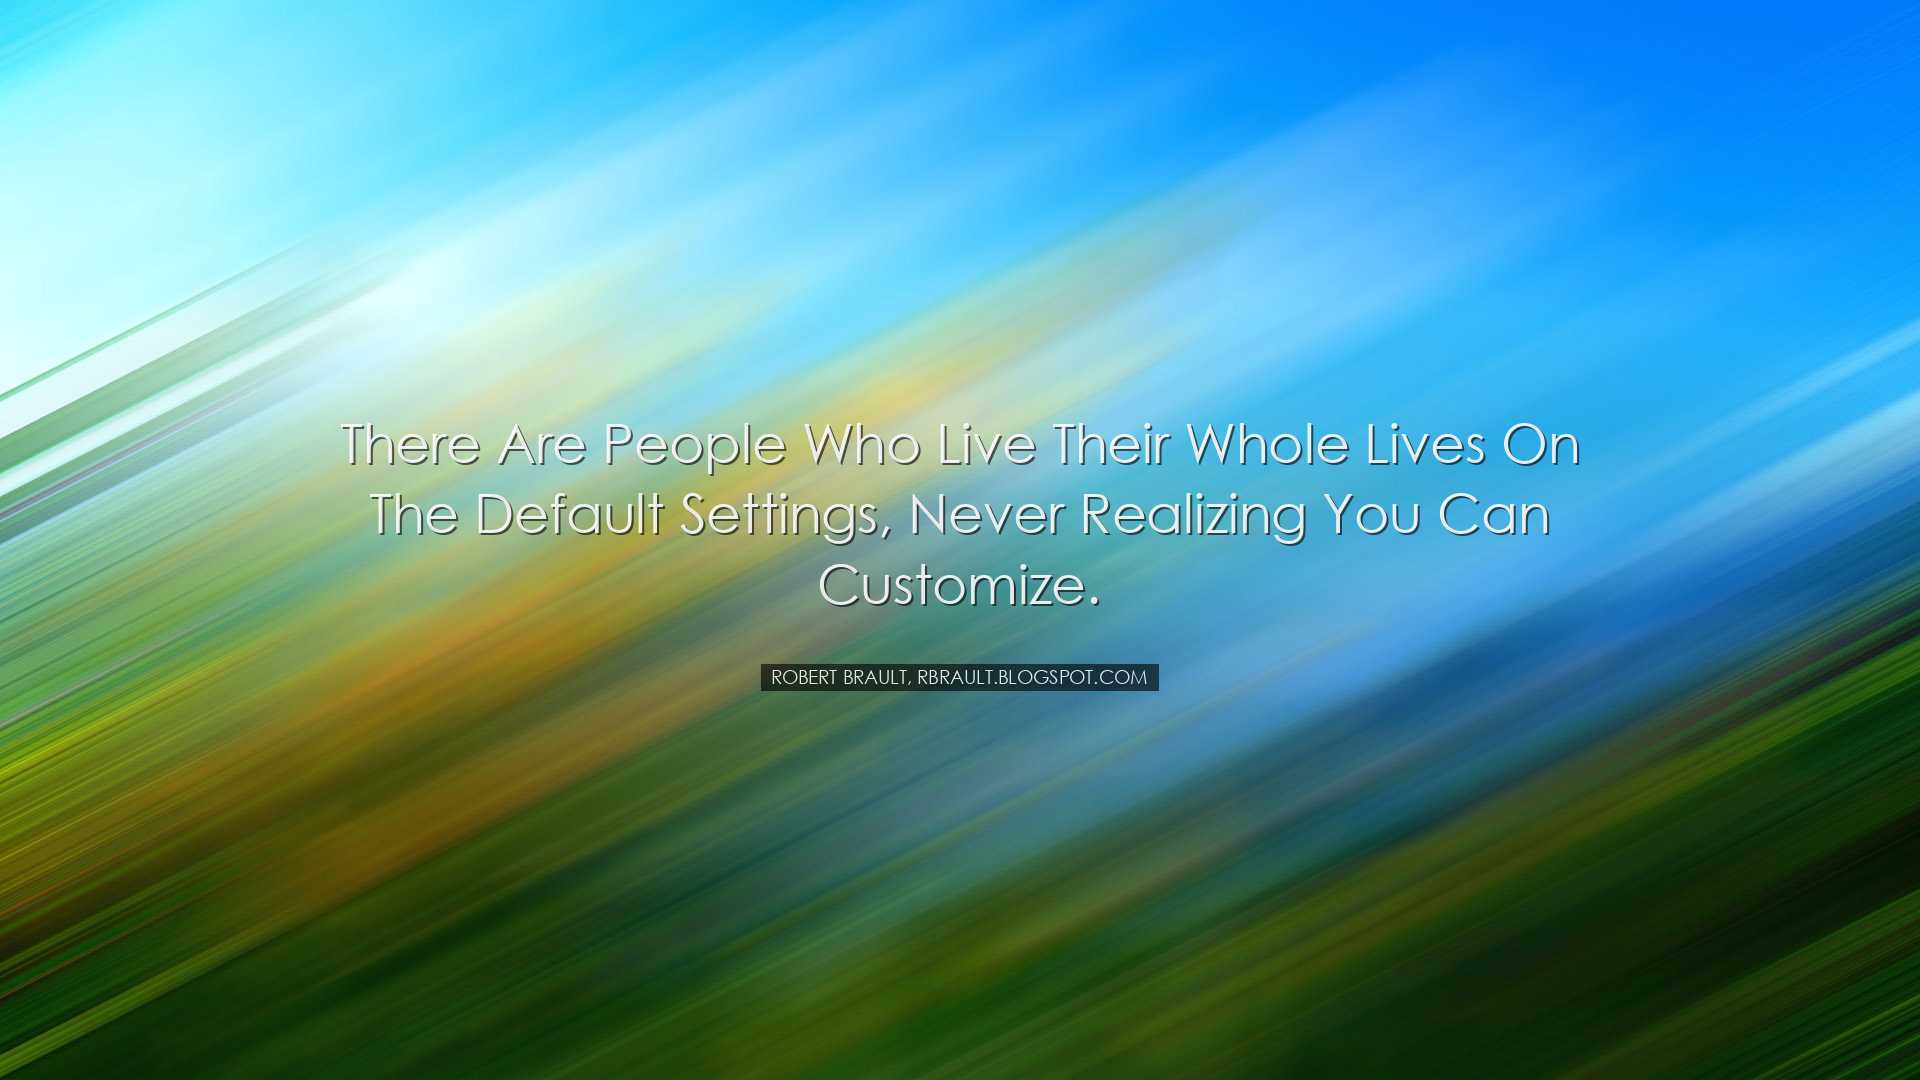 There are people who live their whole lives on the default setting